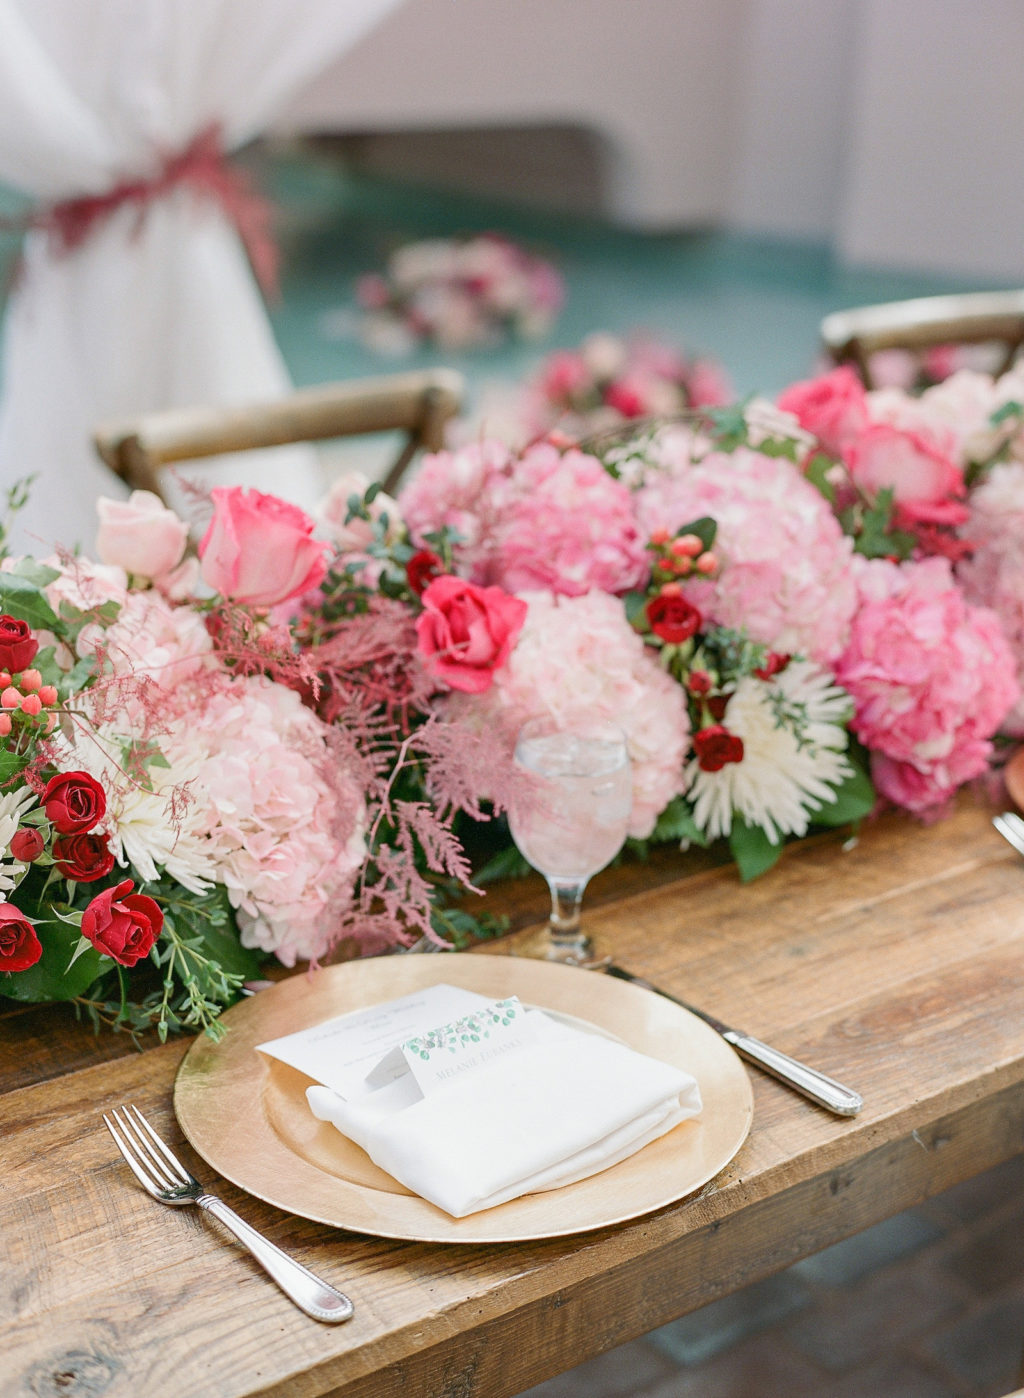 Elegant Garden Themed Wedding Reception Decor, Long Wooden Feasting Table with Gold Chargers and White Linen Napkins, Pink Hydrangeas and Roses with White Flowers and Greenery Lush Table Runner